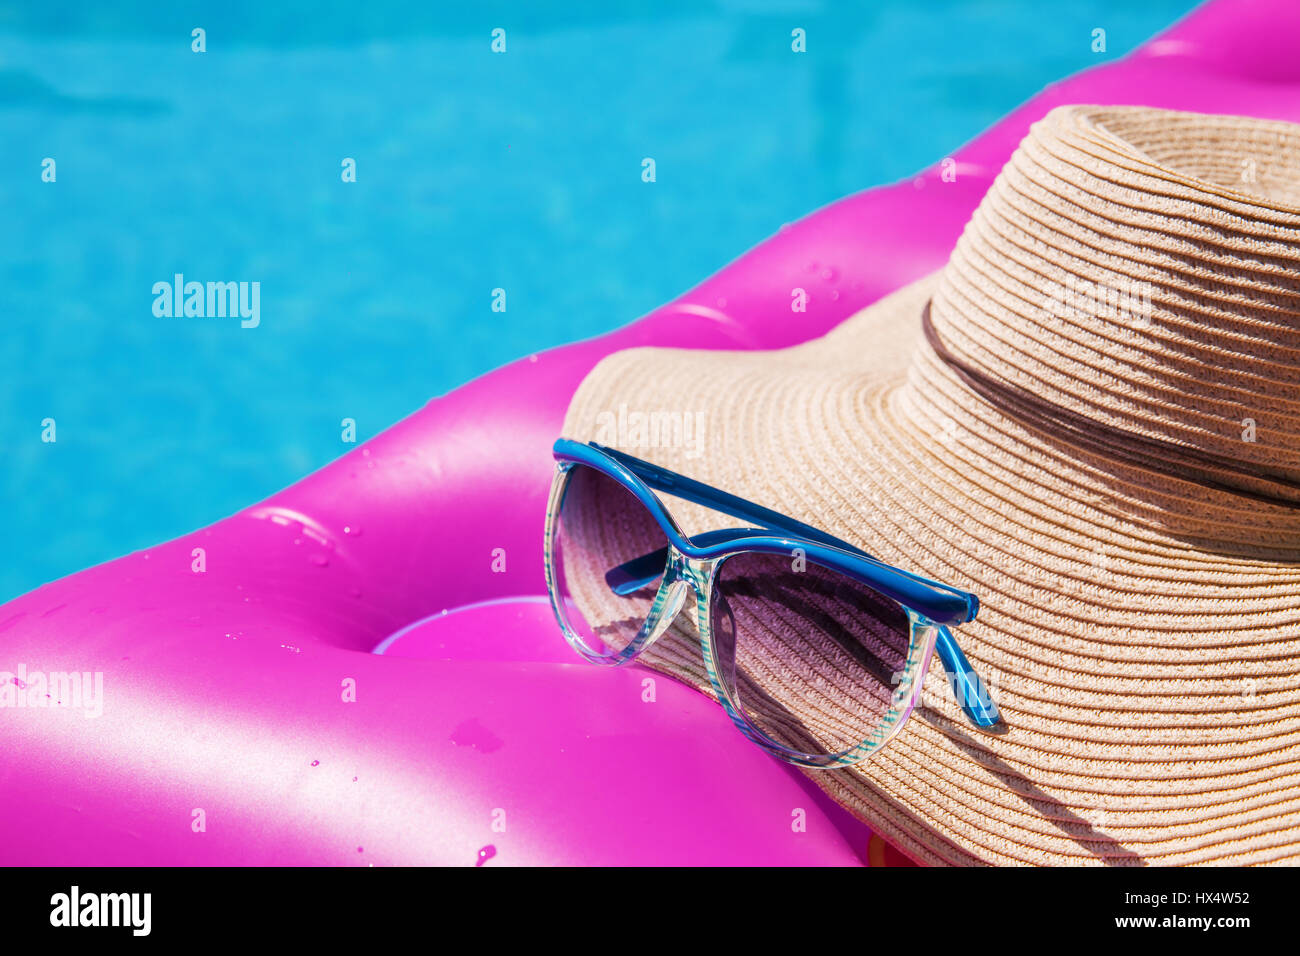 Sunglasses and straw hat on a pink air mattress in swimming pool. Tropical summer concept. Stock Photo